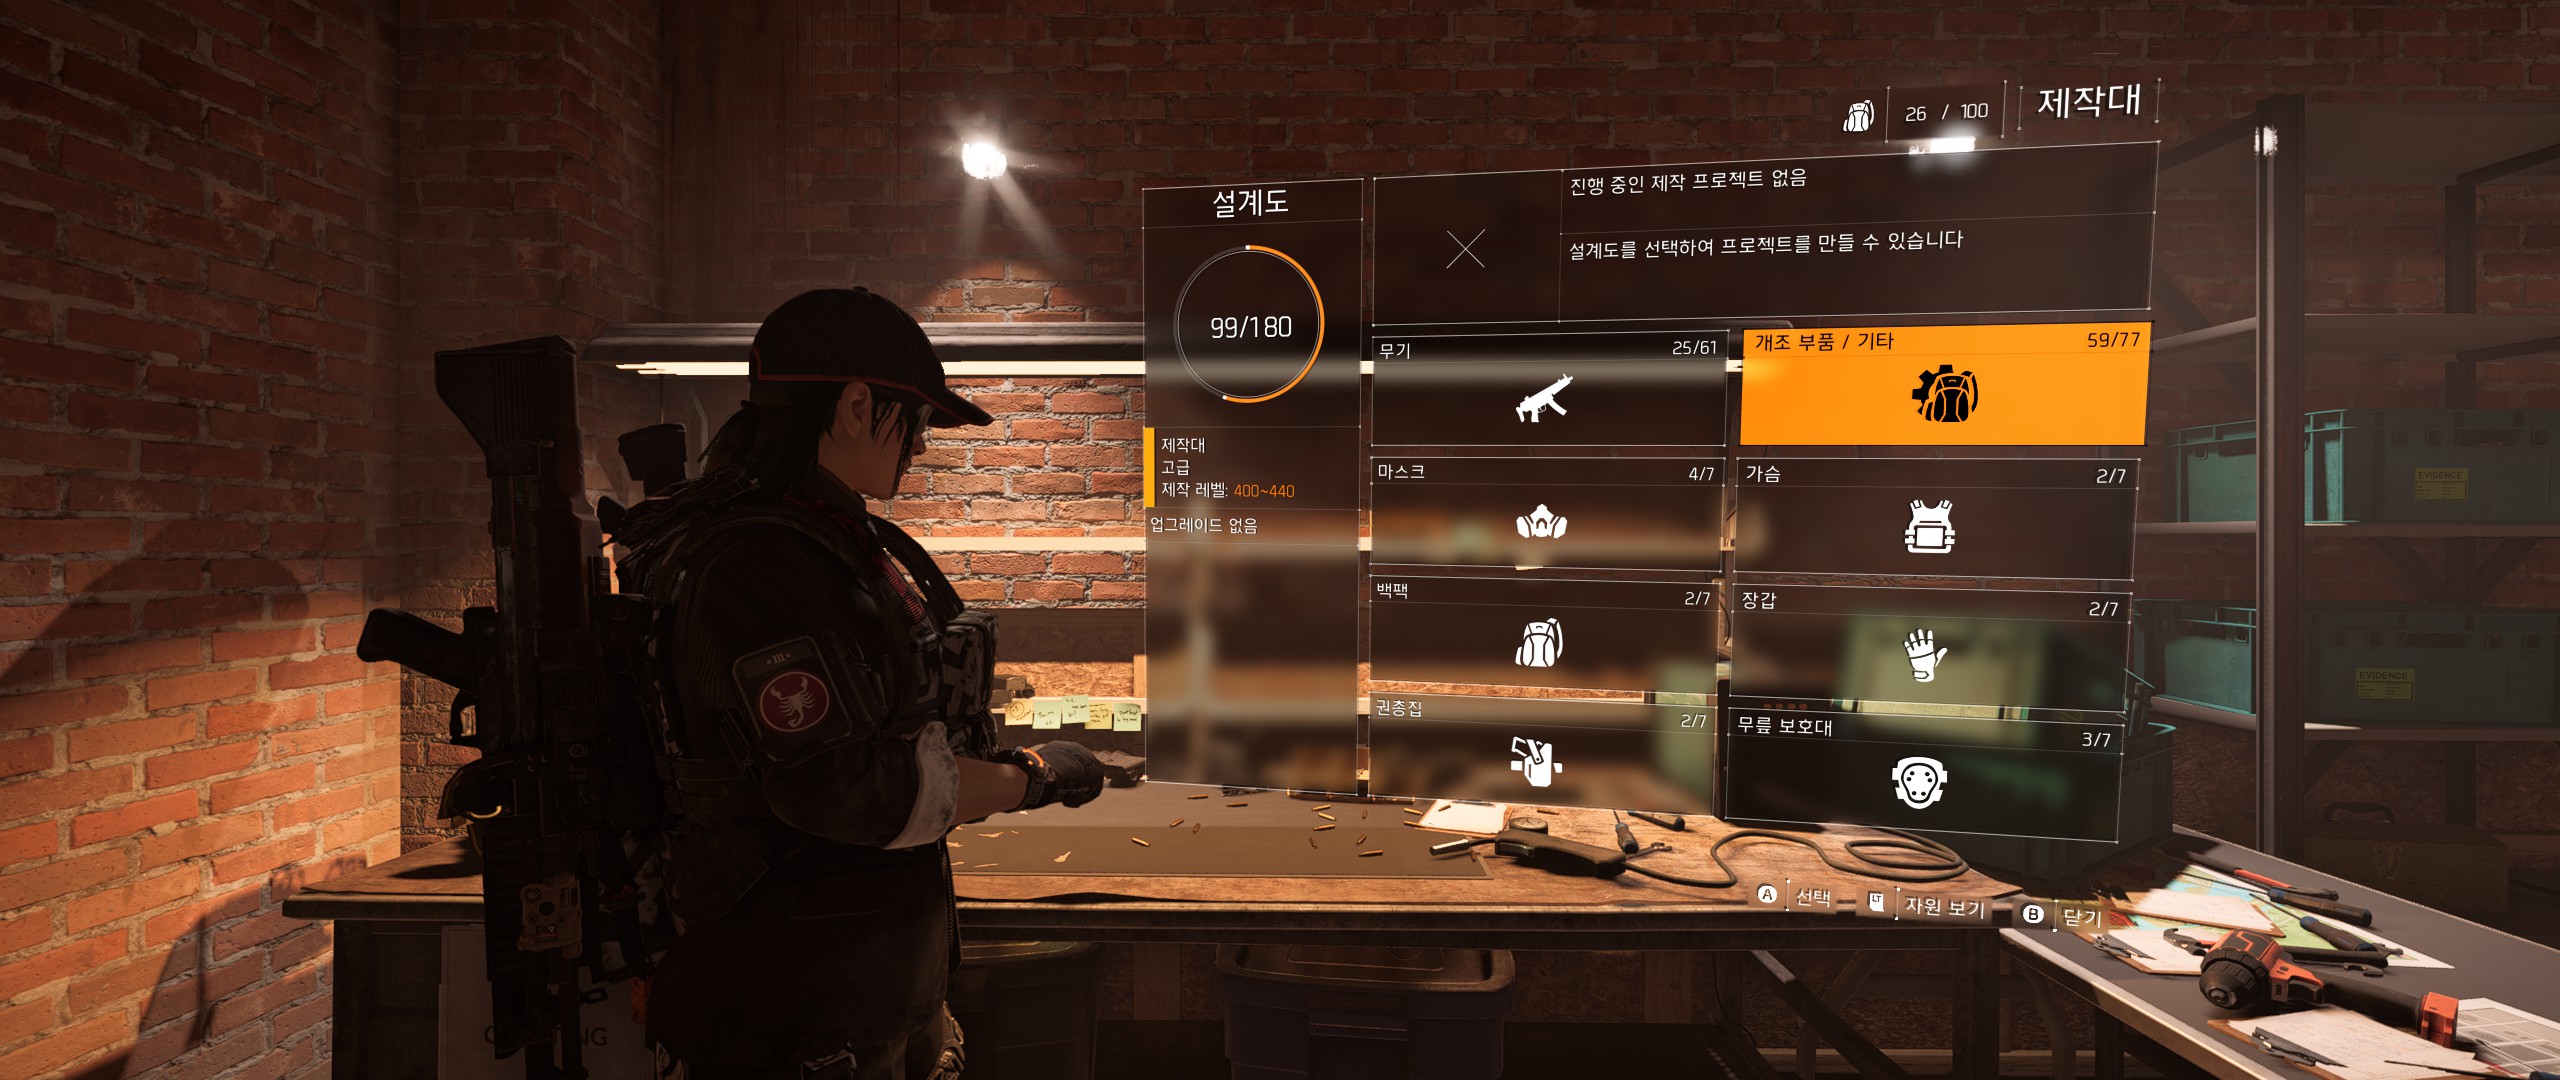 Tom Clancy's The Division® 22019-4-1-18-47-22.jpg